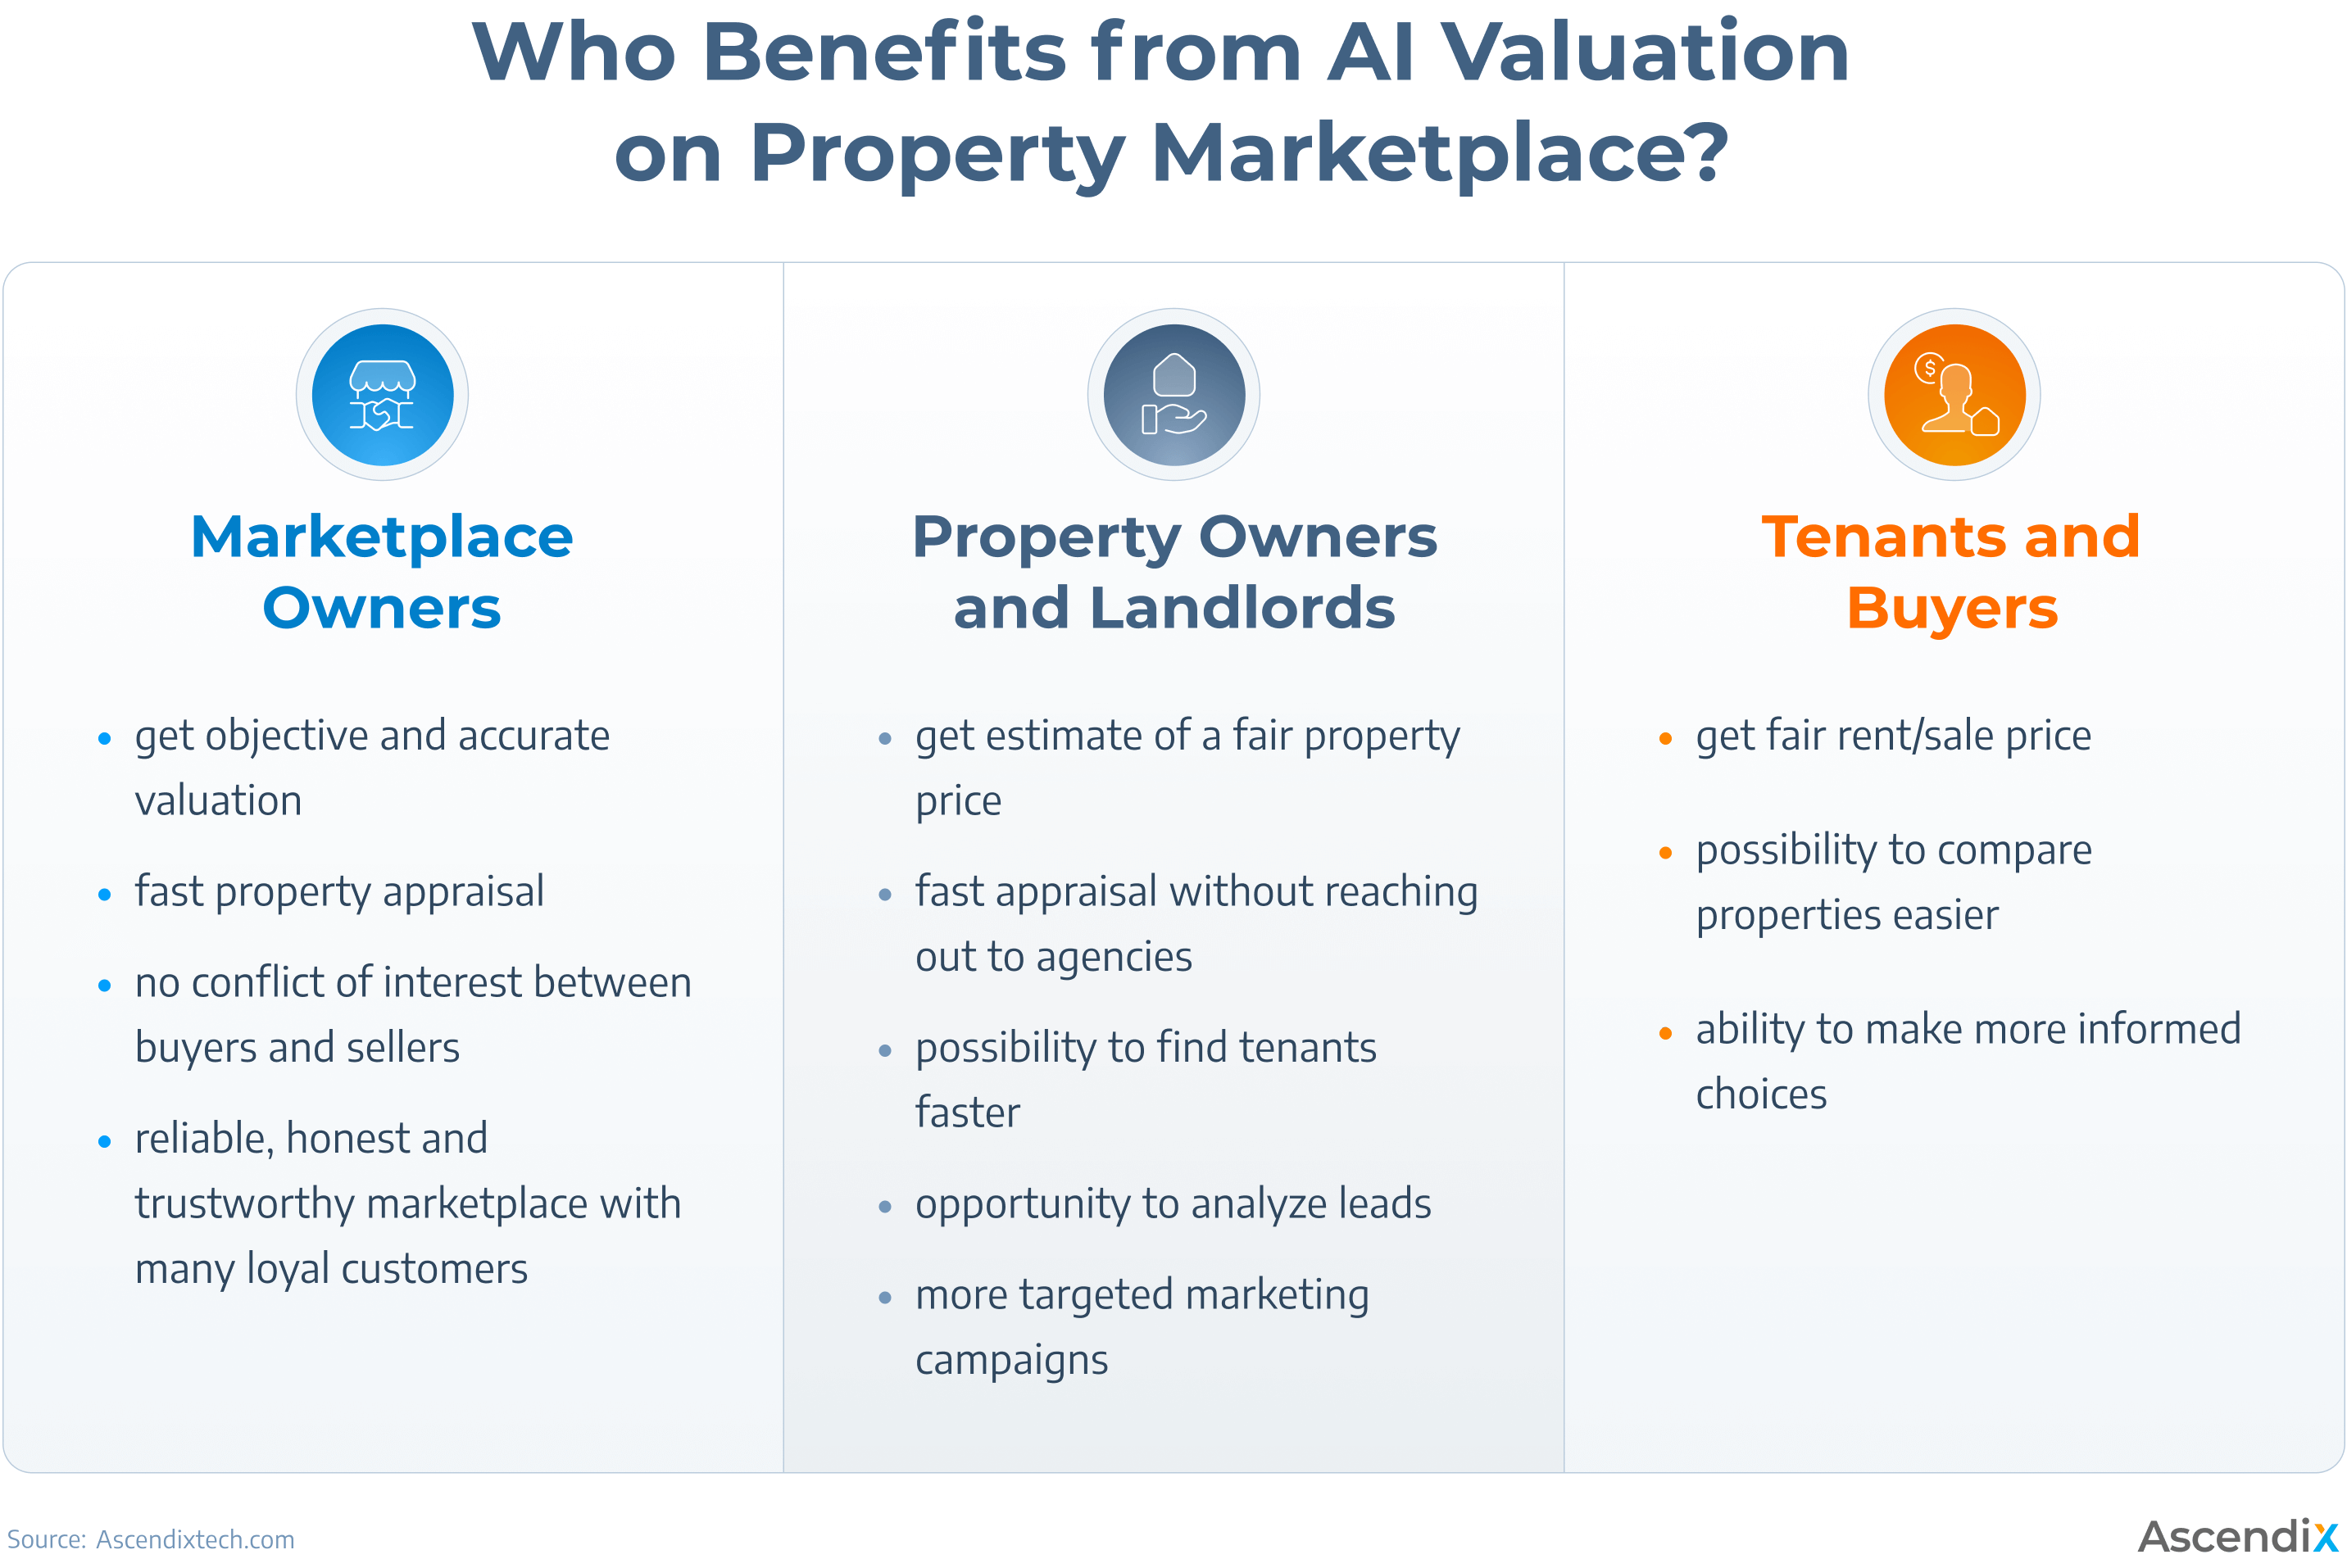 image describing benefits of ai real estate valuation software on marketplaces